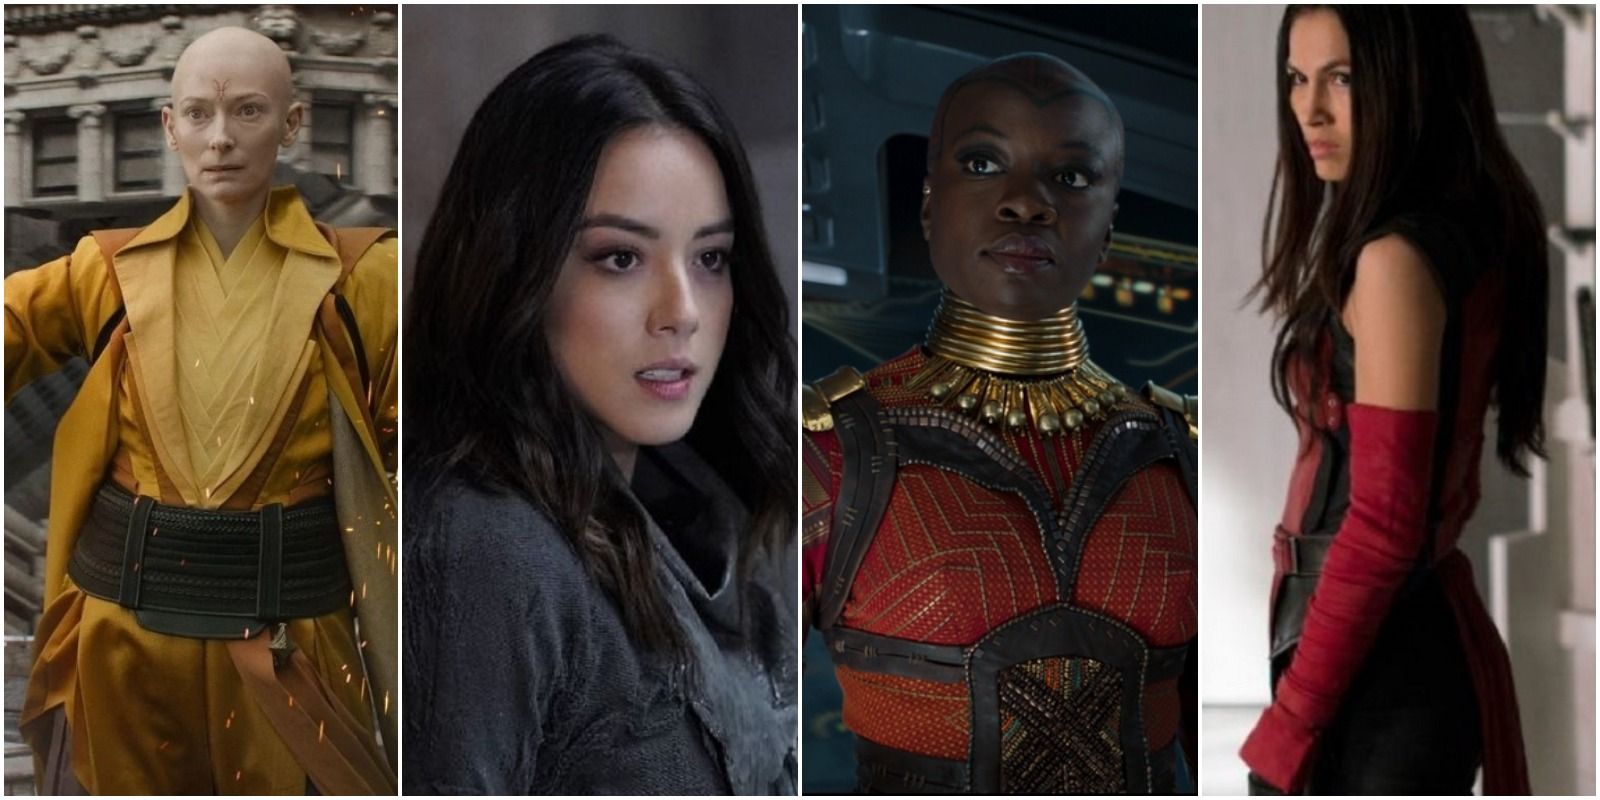 Mcu Top 10 Female Characters Ranked By Hand To Hand Combat